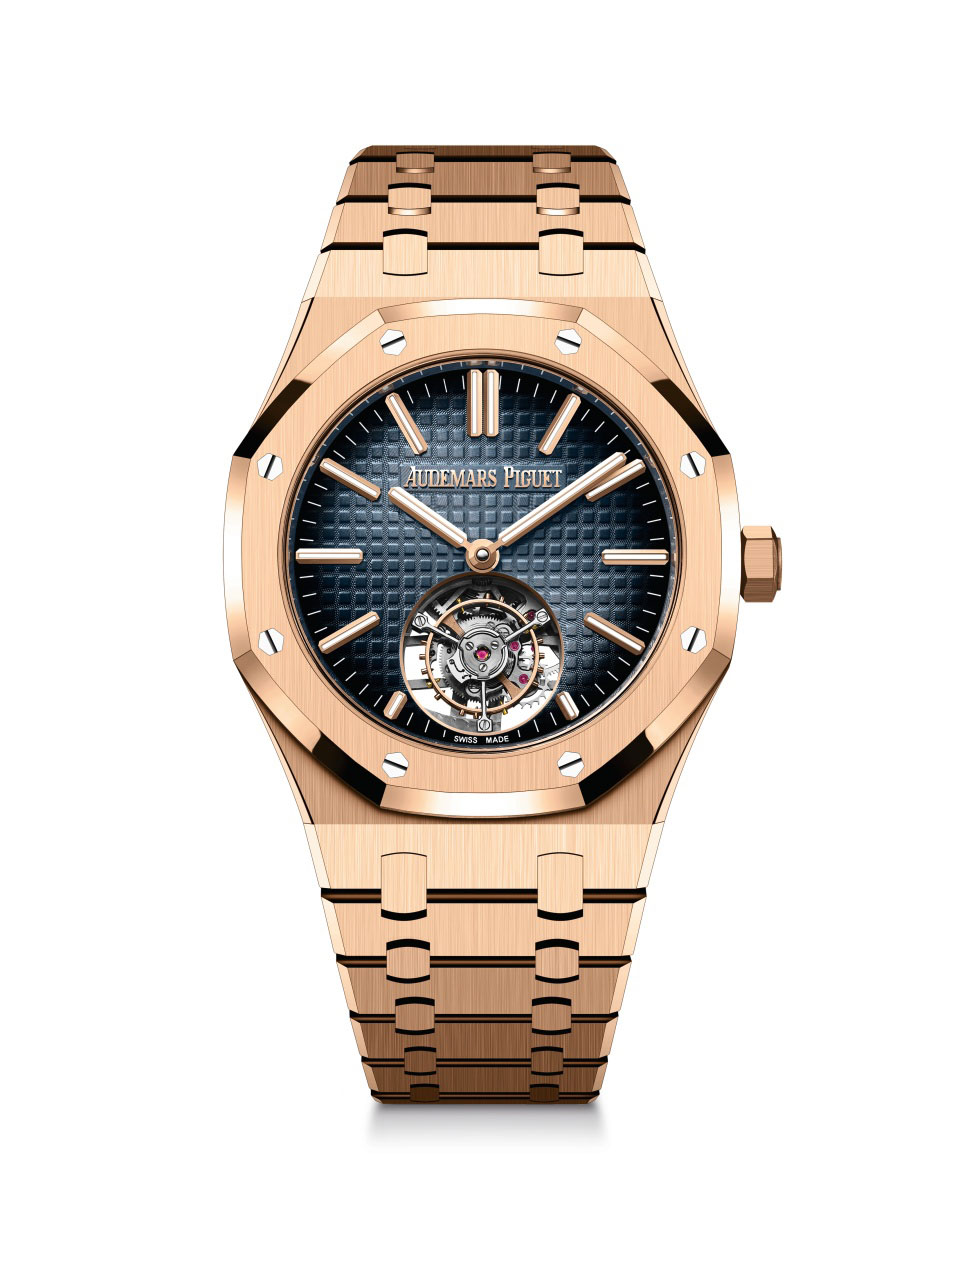 Royal Oak Selfwinding Flying Tourbillon / 41mm; Ref. 26730OR.OO.1320OR.01 in 18-carat pink gold with smoked blue dial with “Grande Tapisserie” pattern